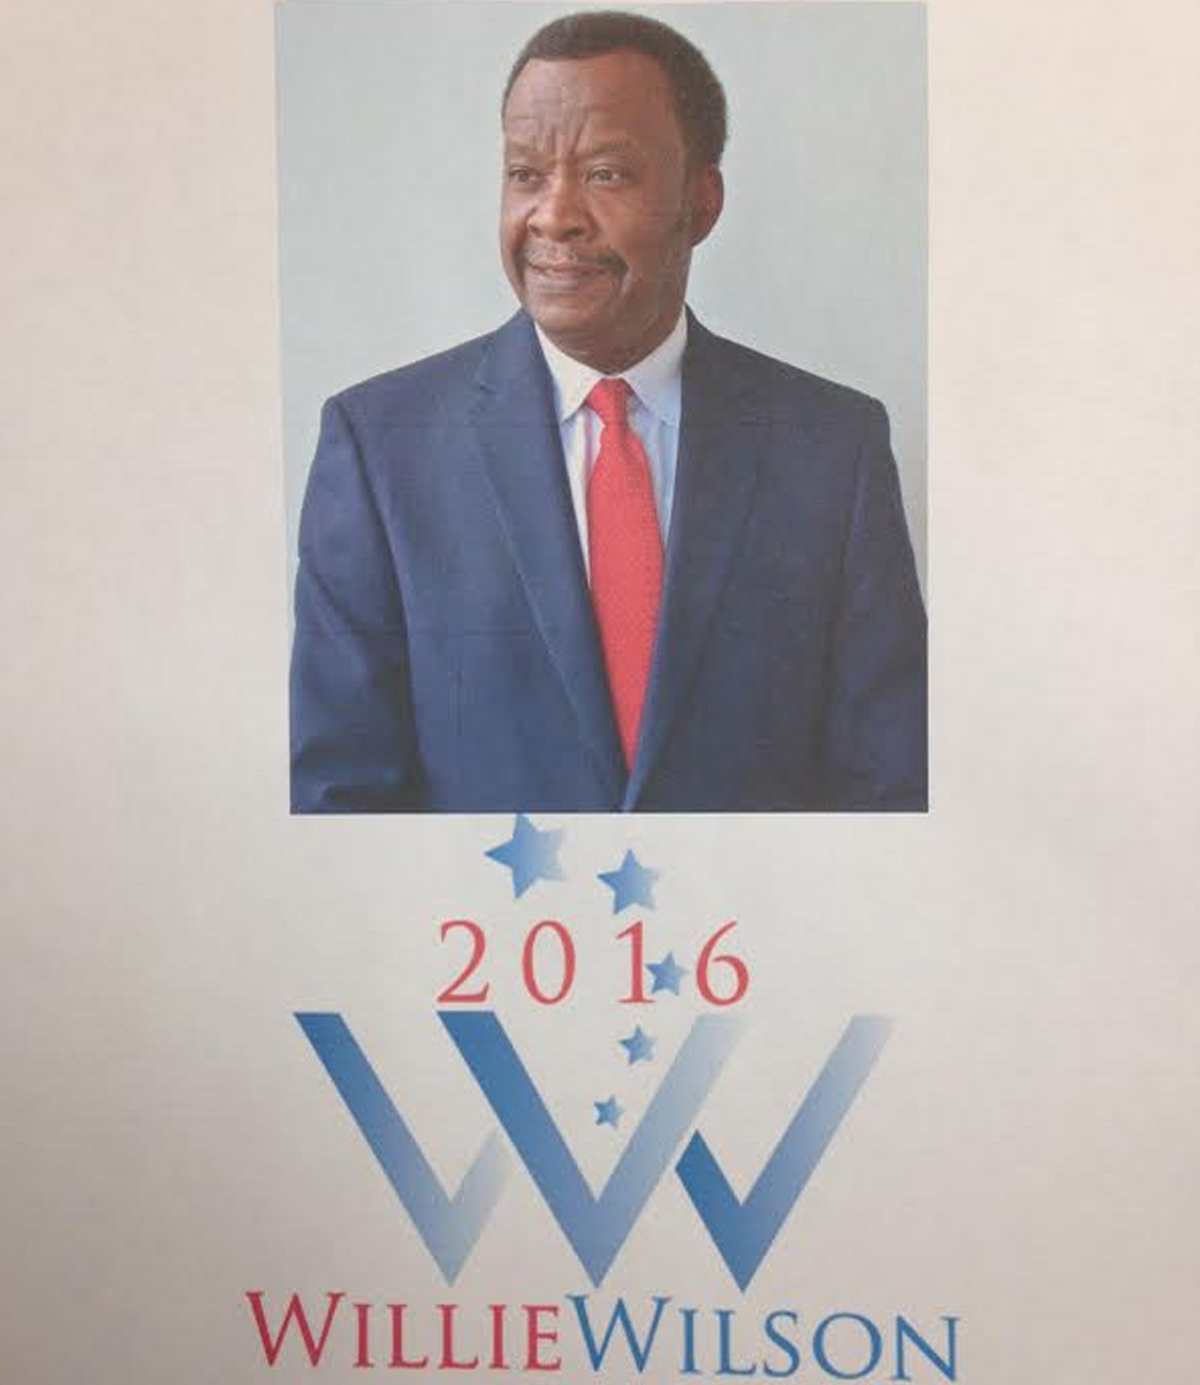 Candidate Willie Wilson joins a host of dignitaries 